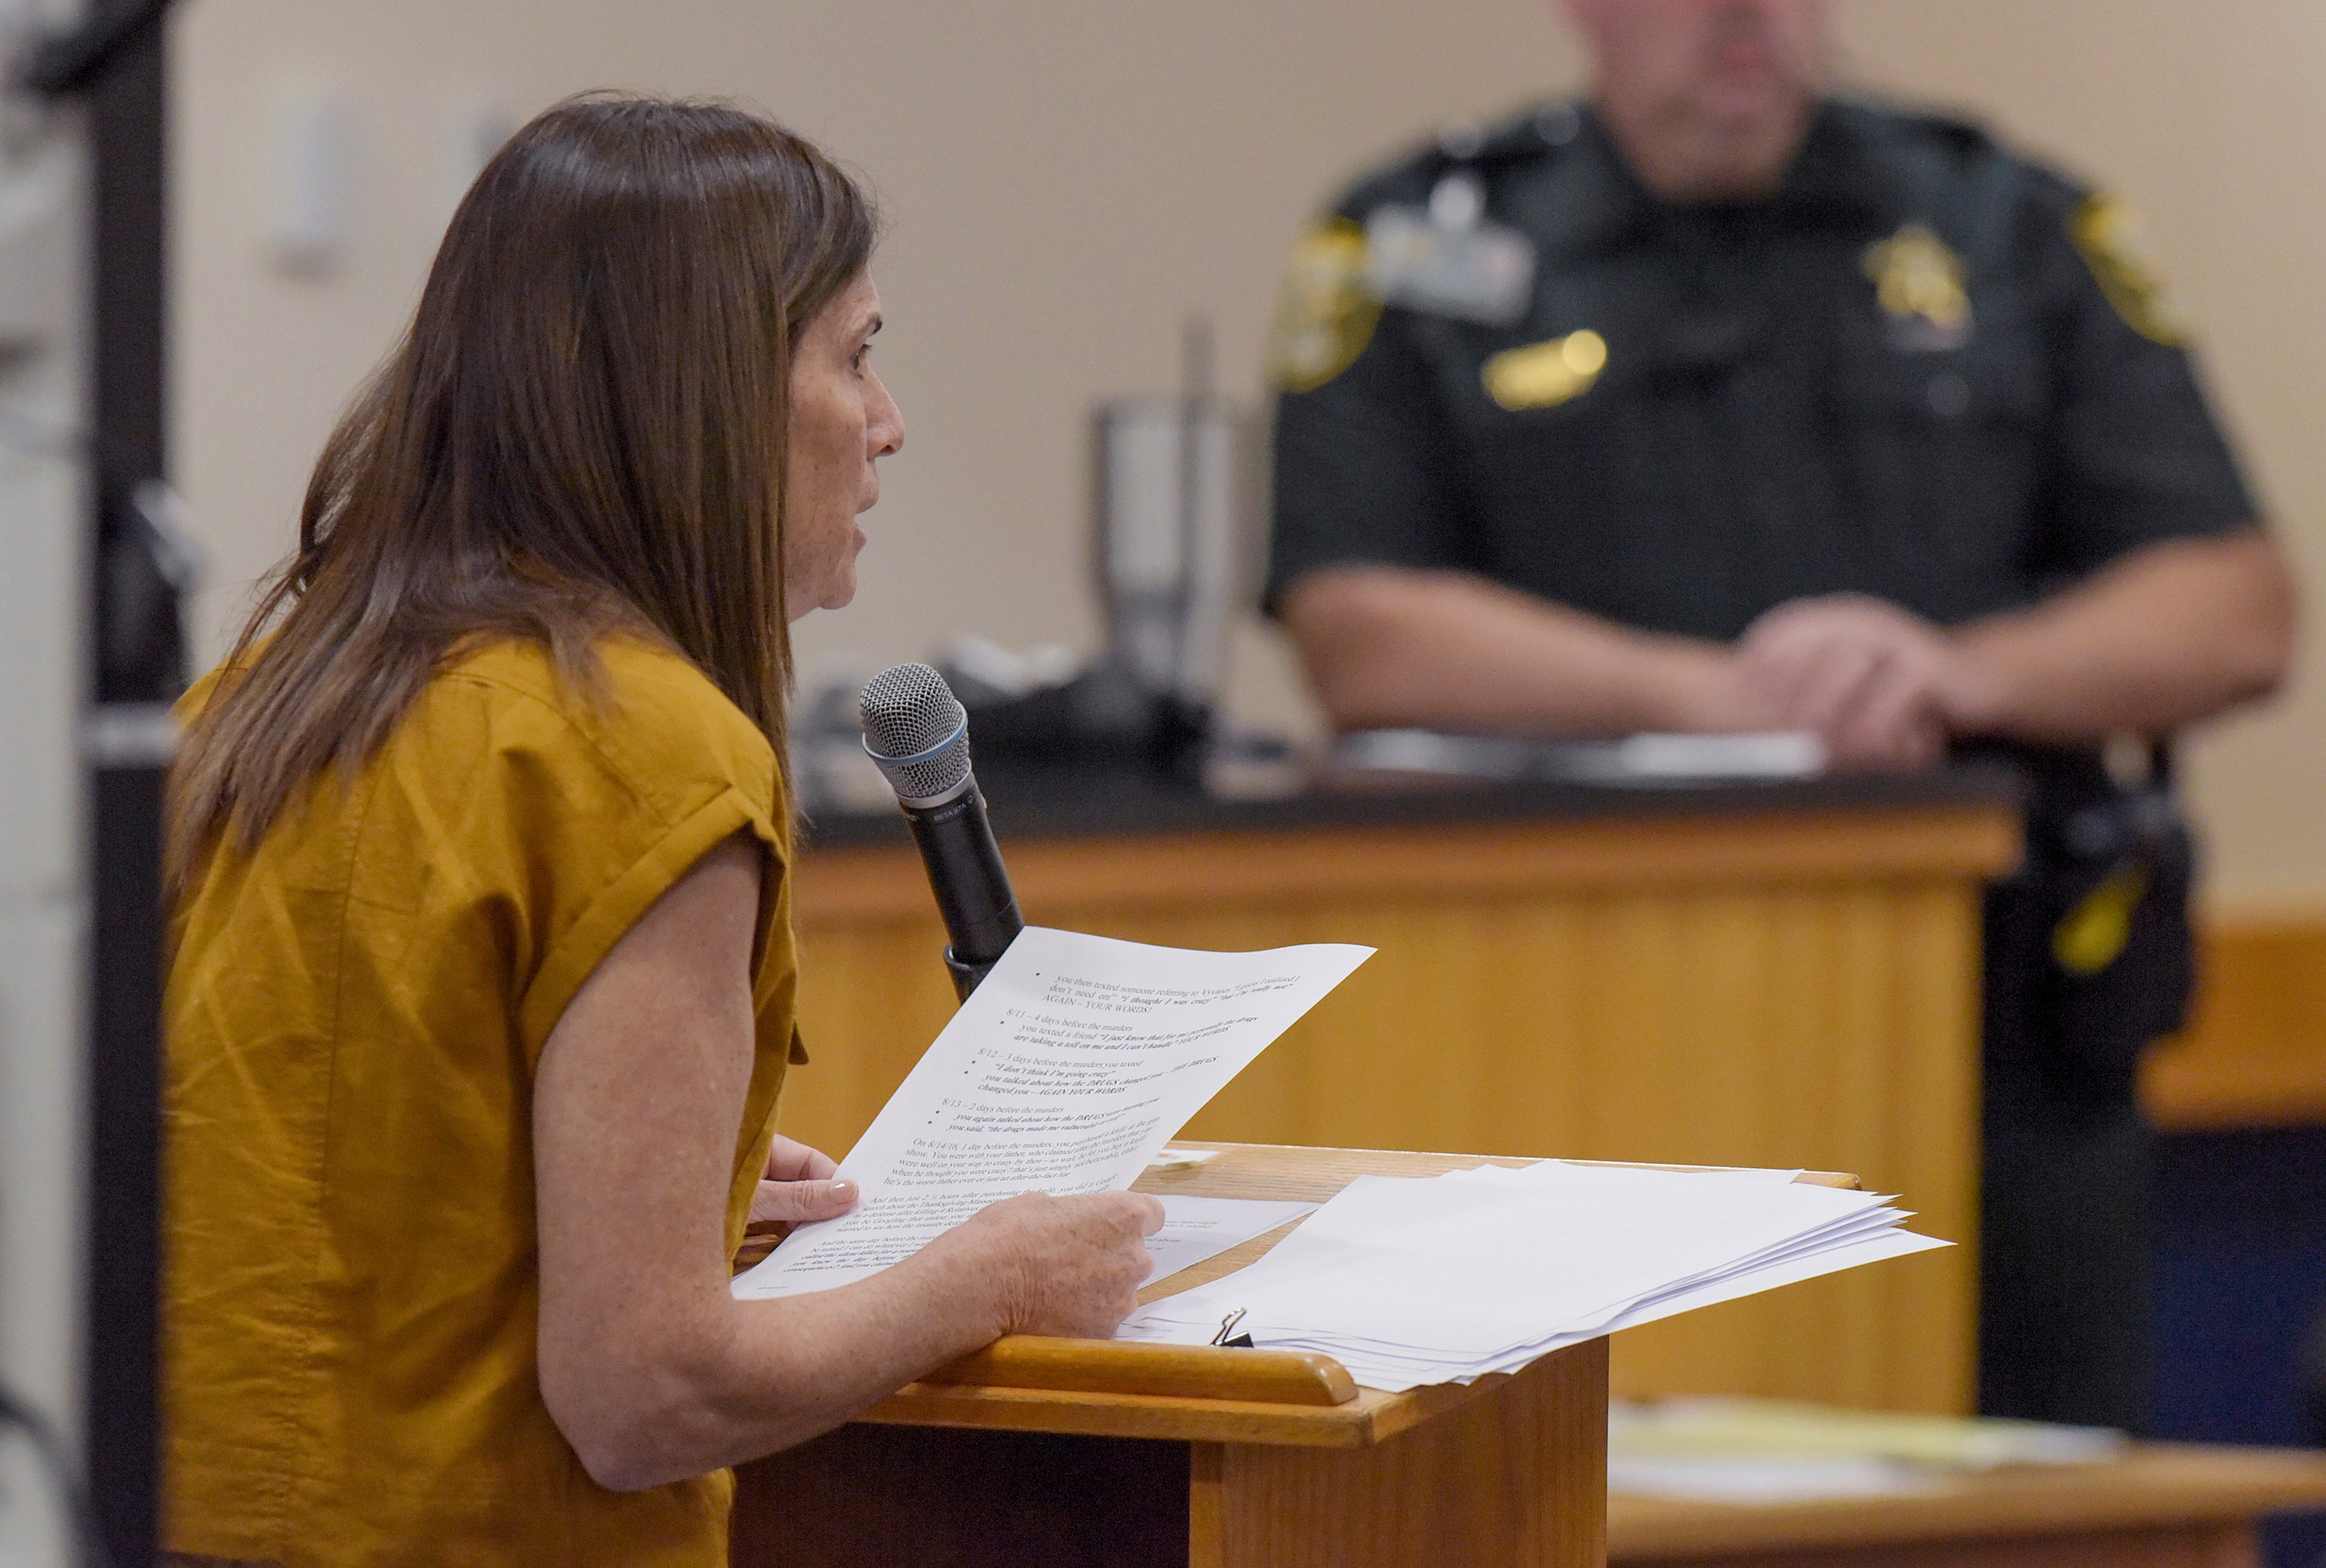 Cindy Mishcon, sister of murder victim Michelle Mishcon, reads her statement about Austin Harrouff during a court proceeding at the Martin County Courthouse on Monday.